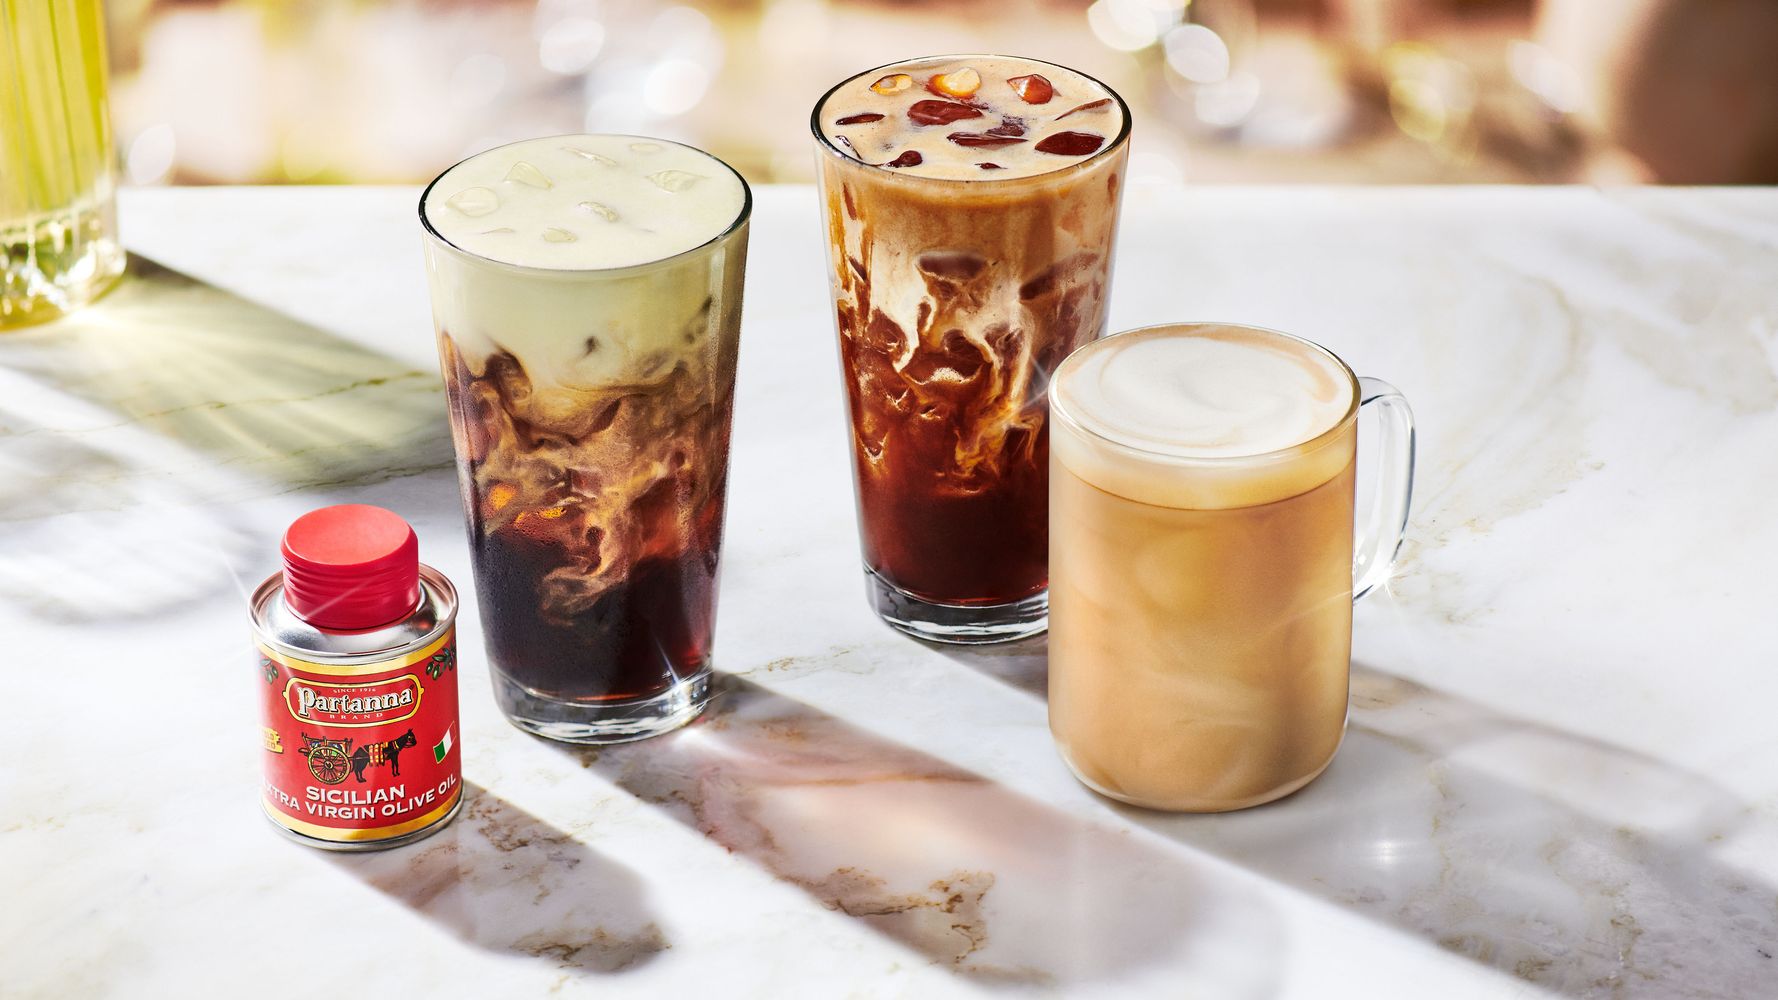 11 items that will take your homemade iced coffee game to the next